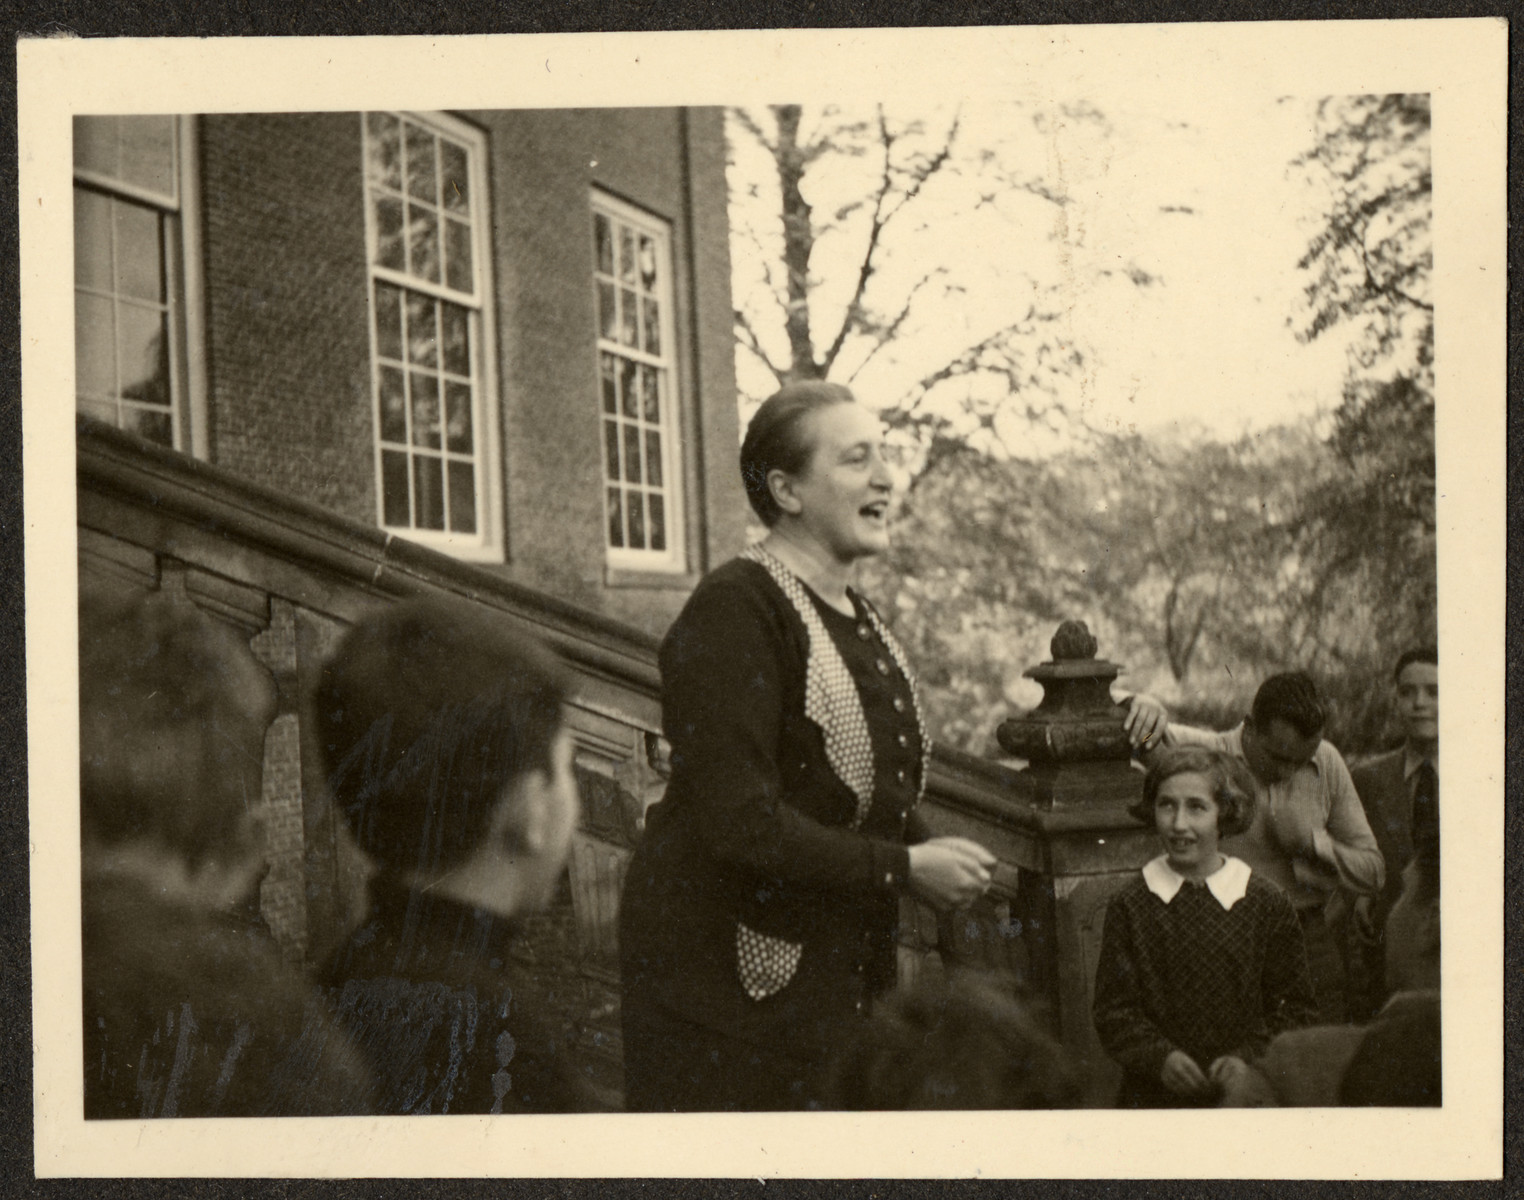 A teacher leads an activity for students, many of them German Jewish refugees, on the steps of a Quaker boarding school in Eerde.